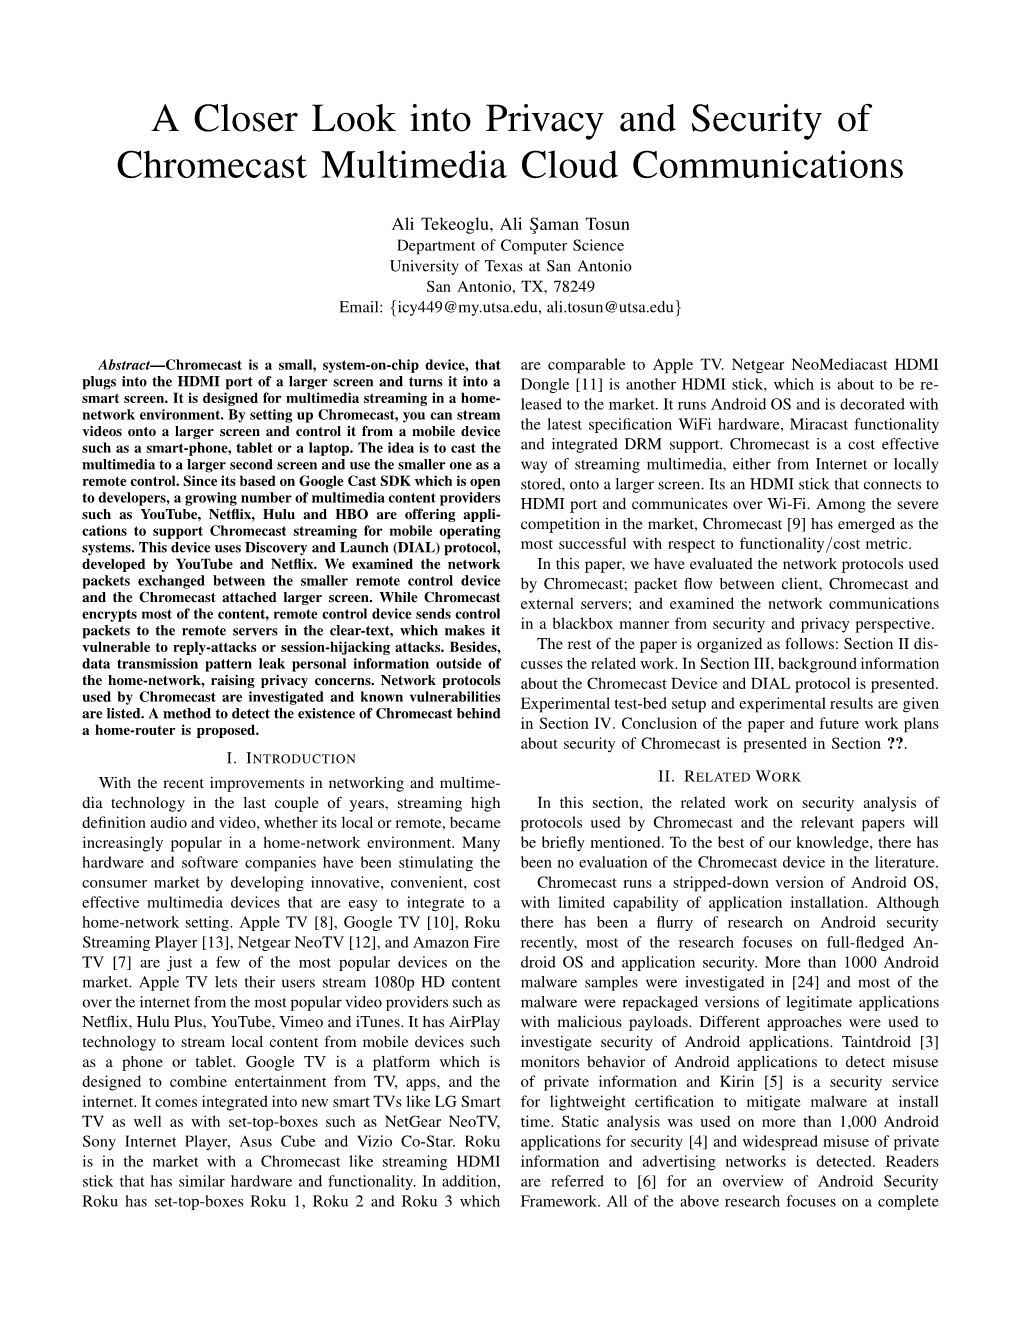 A Closer Look Into Privacy and Security of Chromecast Multimedia Cloud Communications